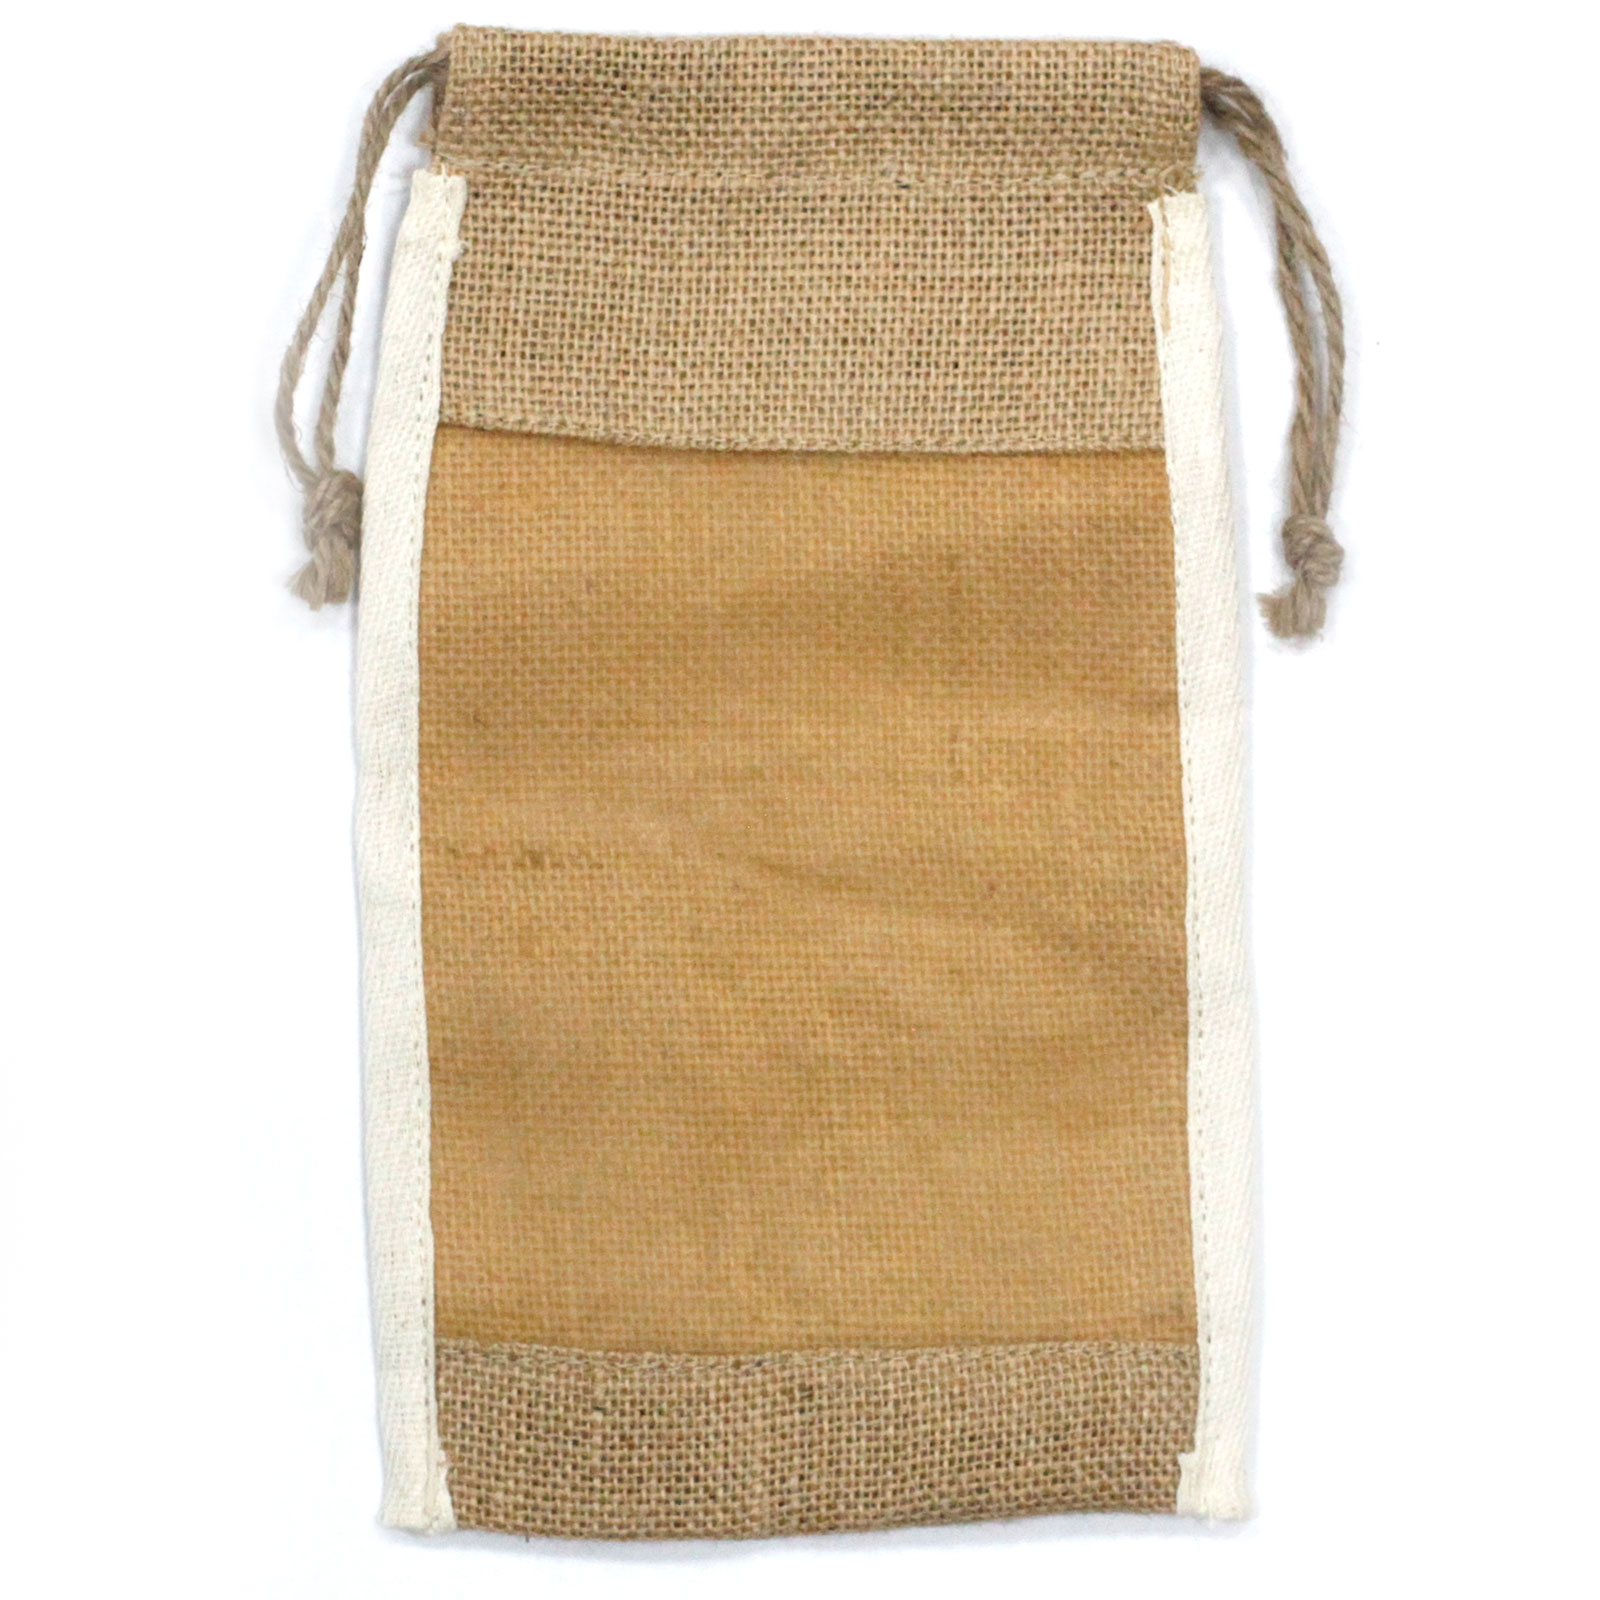 Lrg Washed Jute Pouch - 26x15cm - NatWP-07